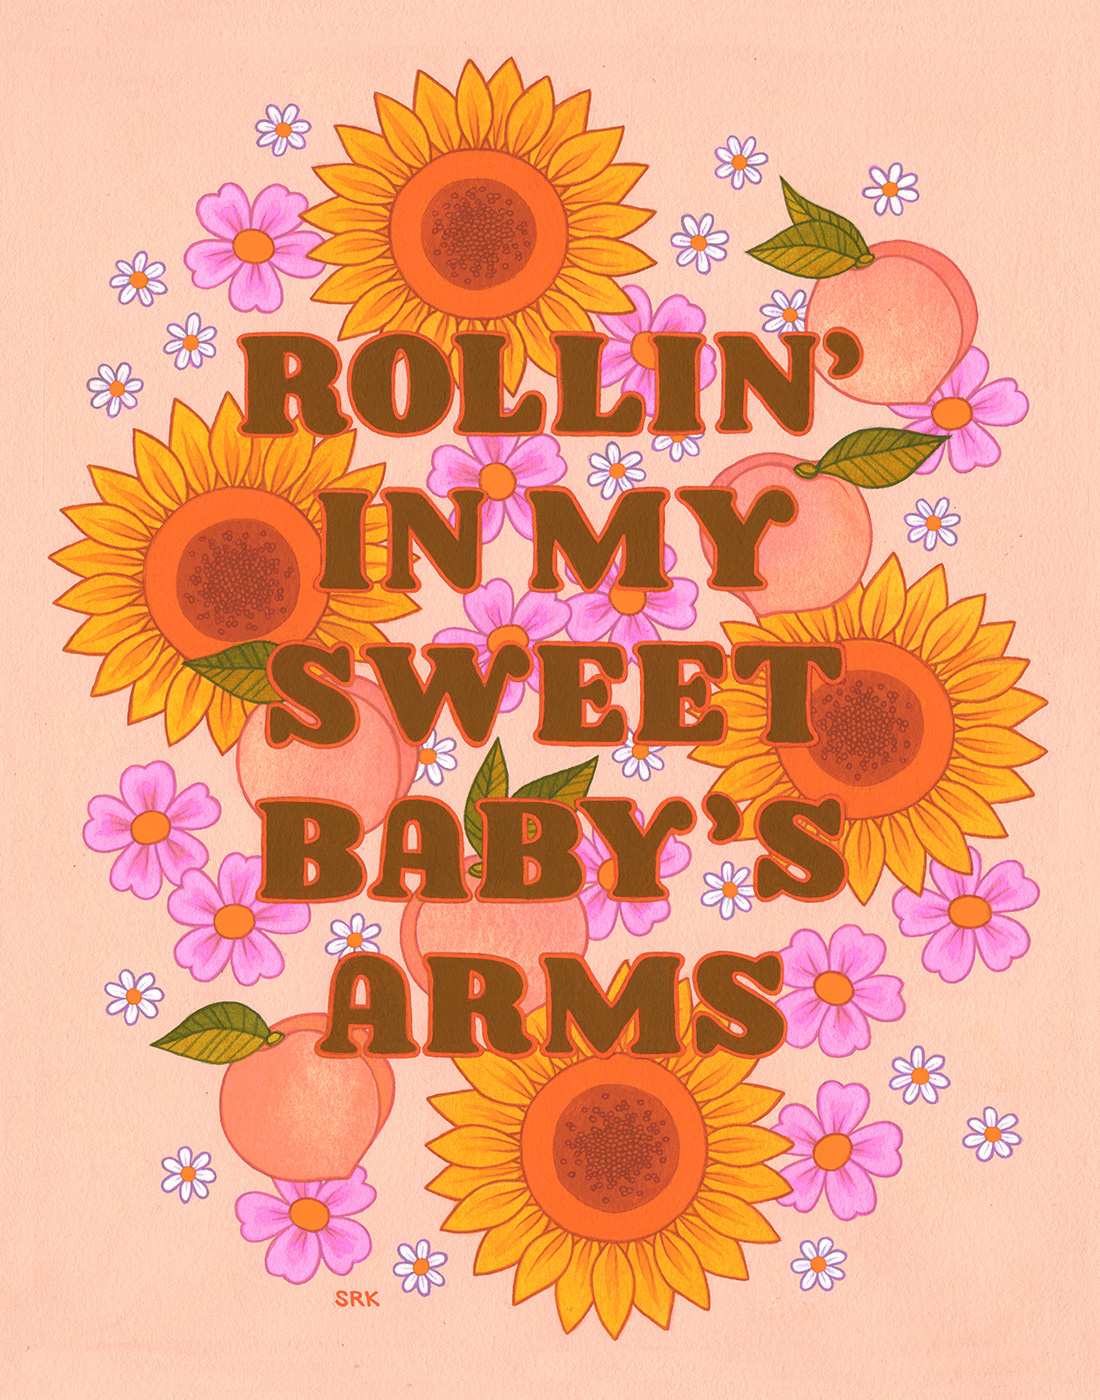 Poster Design type Handlettering Country Music sunflower peach groovy Retro vintage